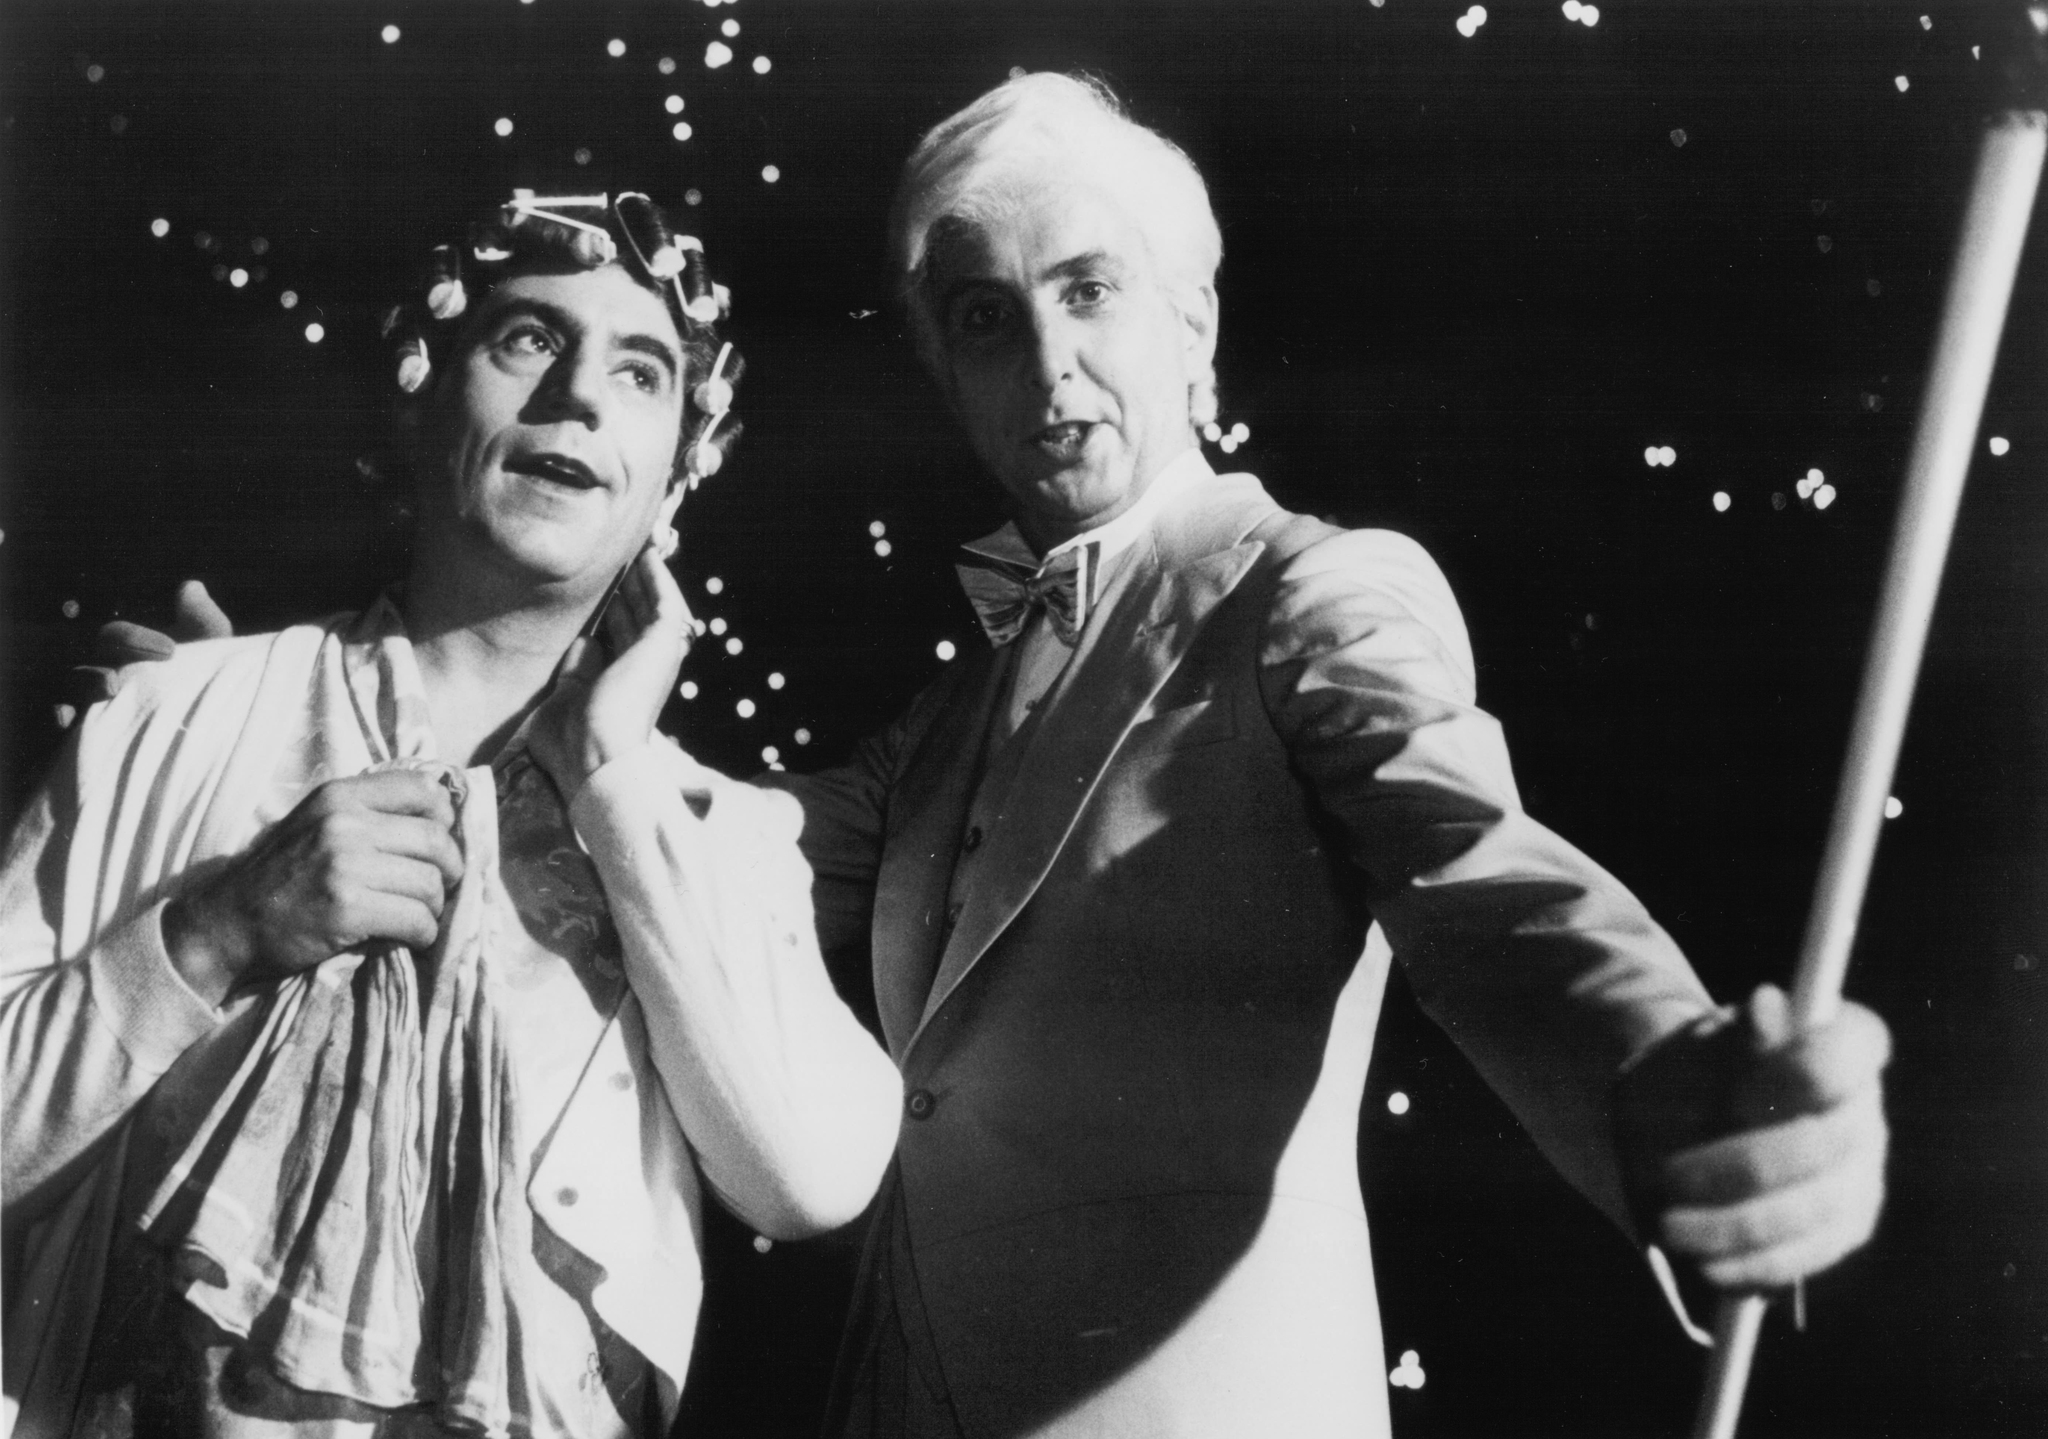 Still of Eric Idle and Terry Jones in The Meaning of Life (1983)